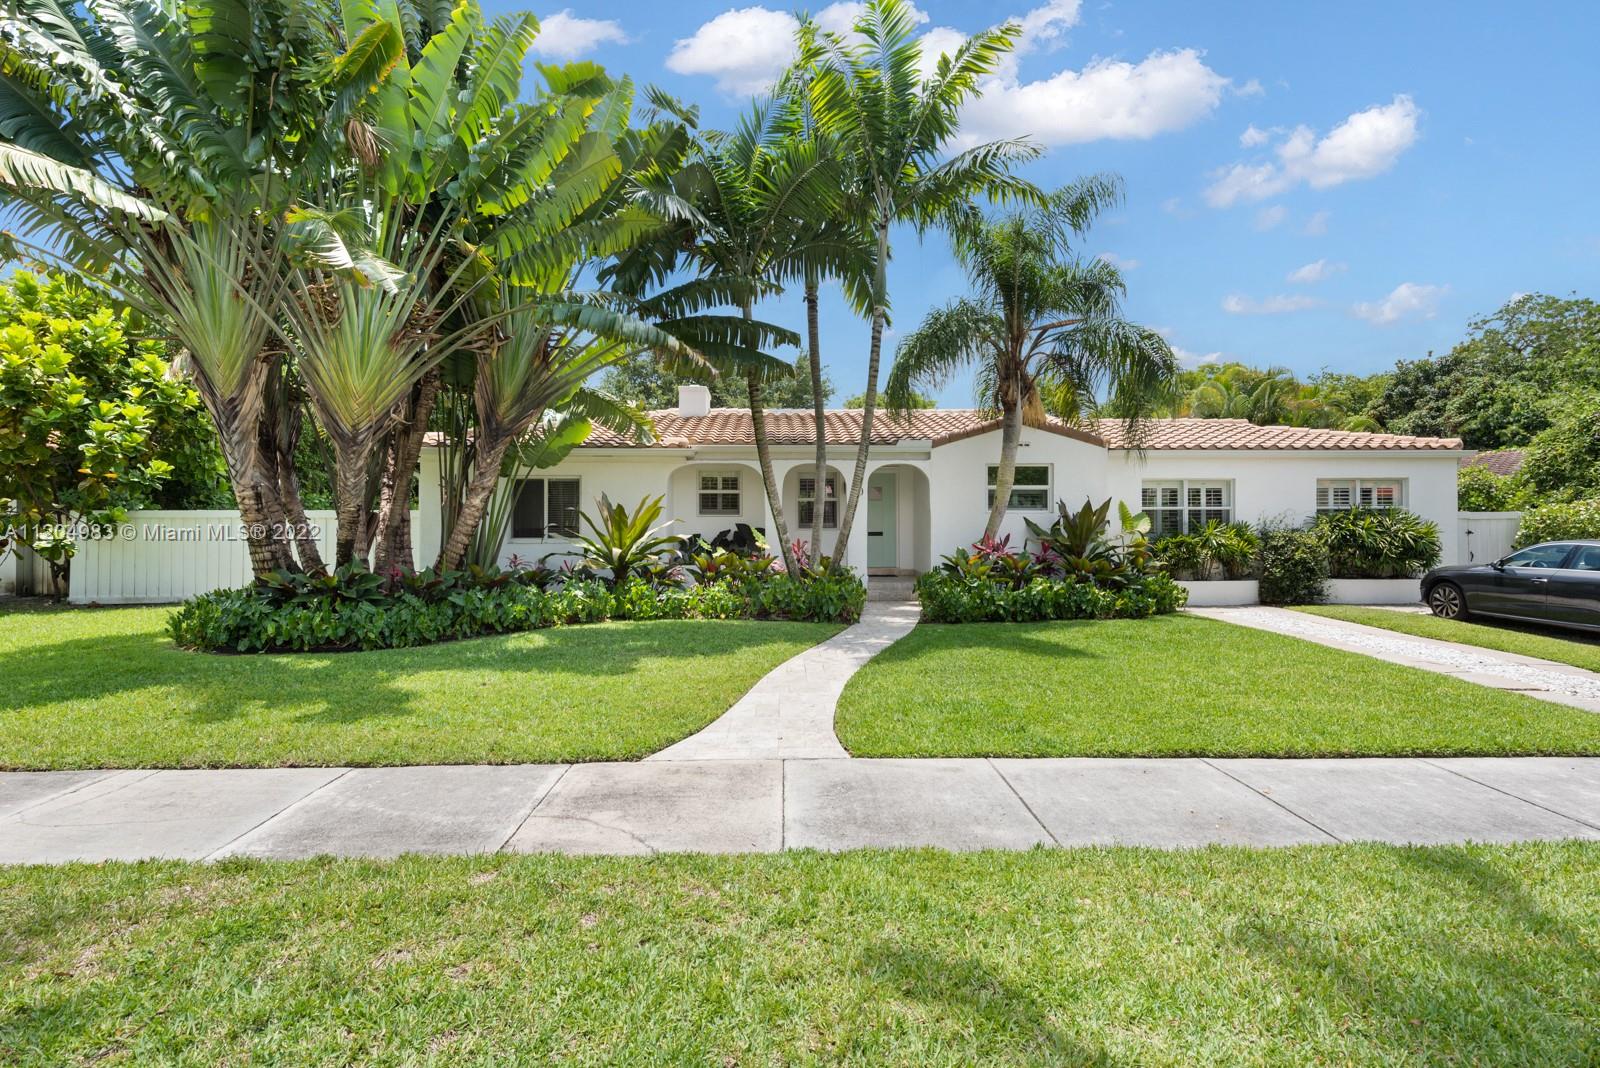 Fully renovated 1930s bungalow in an oversized 11,500 SqFt lot in the heart of coveted Miami Shores. This immaculate pool home offers all the charm and character of a 1930s home with the comfort of modern-day living.  Featuring 3 bedroom, 2 bathrooms + den, this home has new everything: roof (2020), electrical, plumbing and impact windows and doors, kitchen, and bathrooms.  The master suite features double custom walk-in closets and a large en-suite bathroom with double vanities and a walk-in shower. Additional features include vaulted ceilings, a heated pool, an oversized professionally-landscaped yard, tons of natural light and a laundry room. 

The home is conveniently located within walking distance of downtown Miami Shores, easy access to i95 and it is NOT within a flood zone.